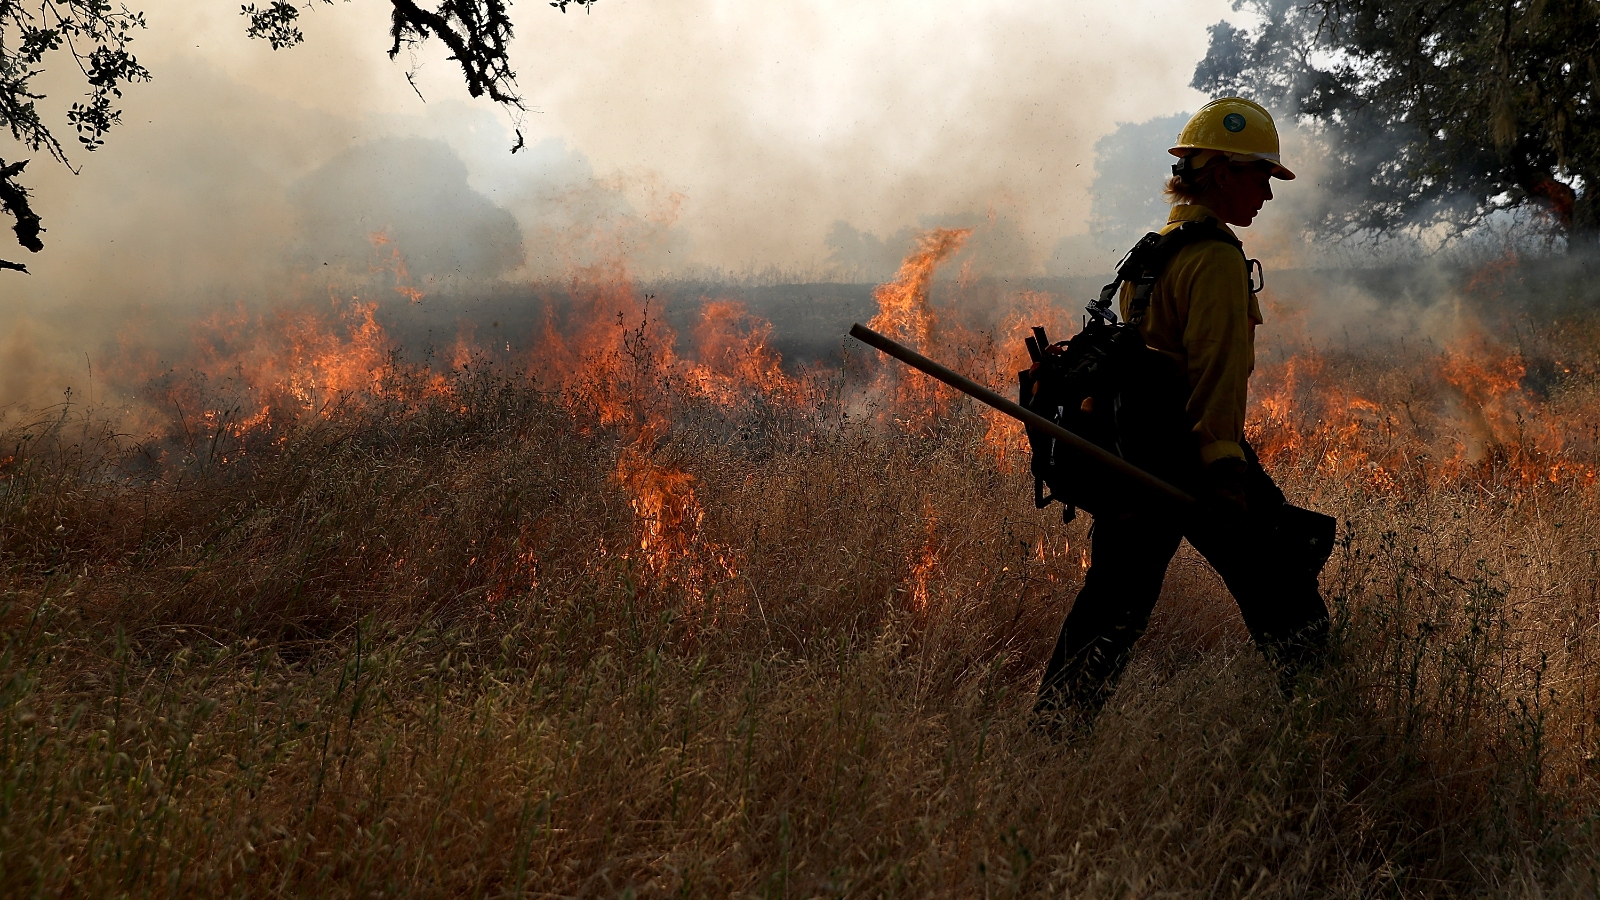 A firefighter monitors a controlled burn at Bouverie Preserve on May 30, 2017 in Glen Ellen, California.